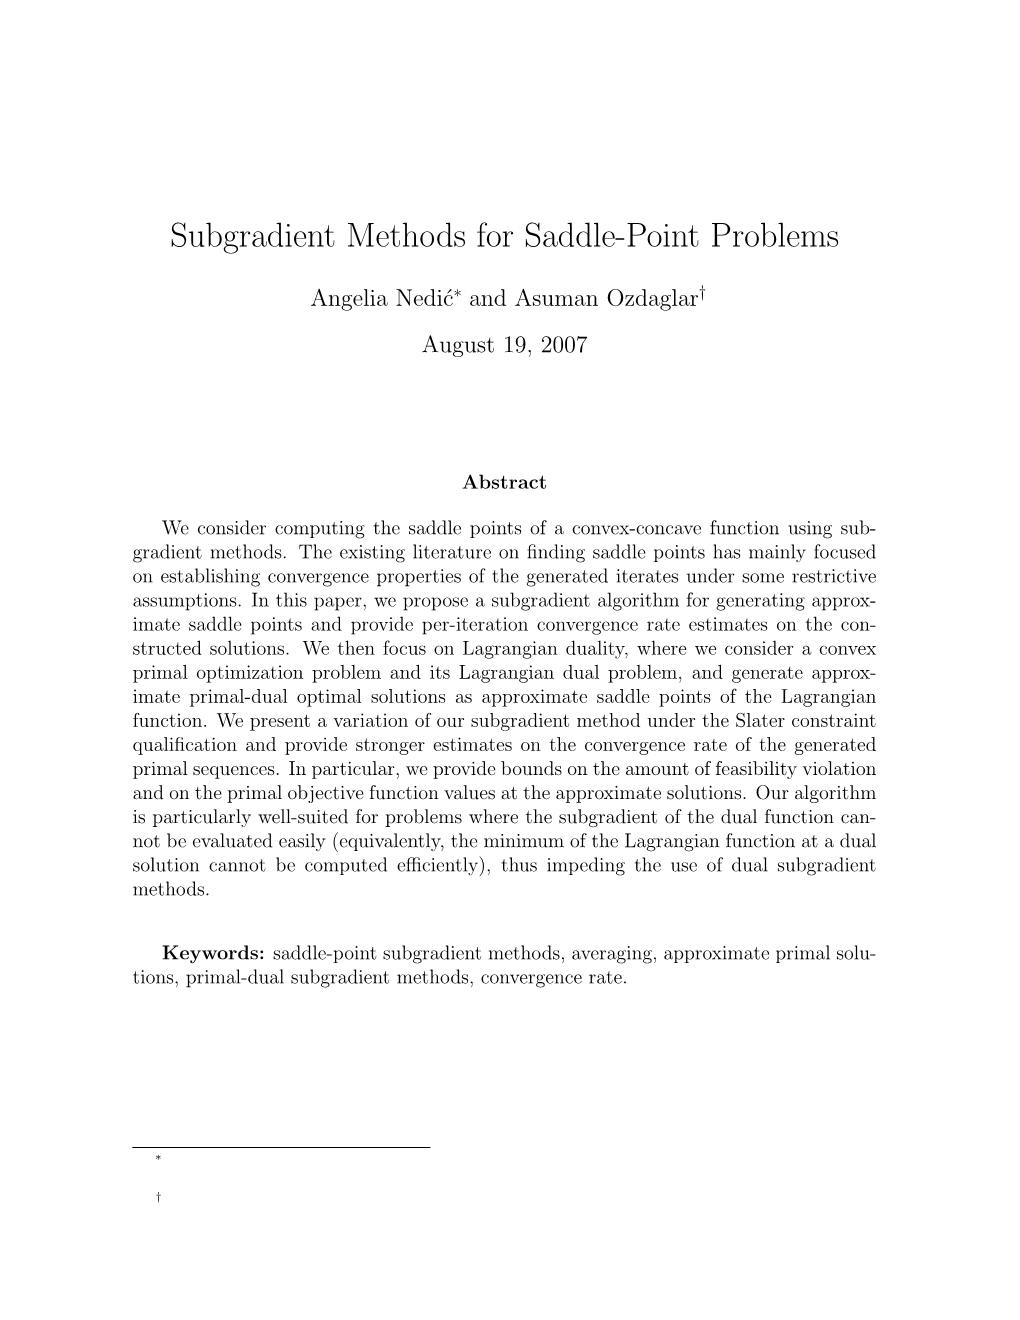 Subgradient Methods for Saddle-Point Problems